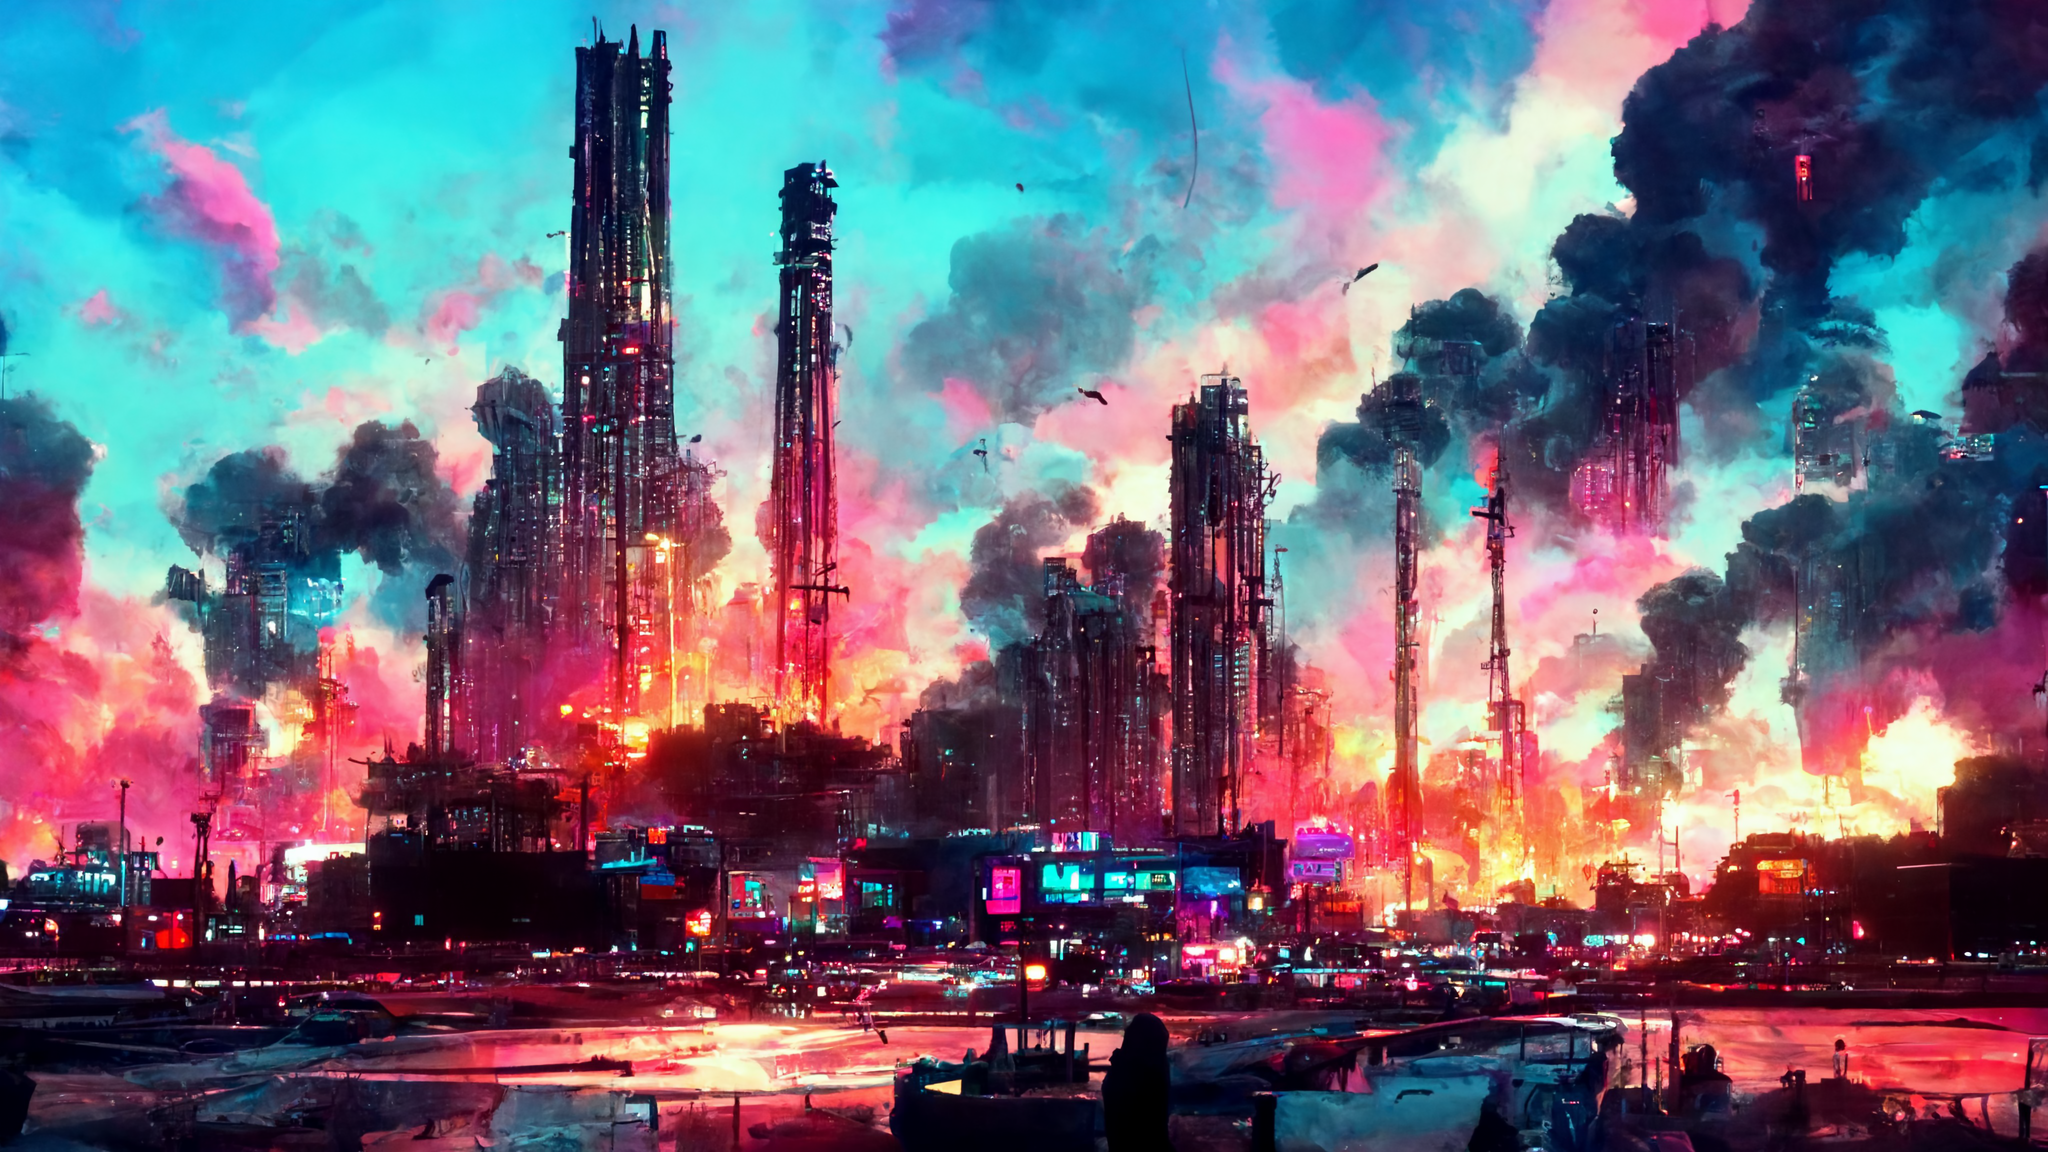 Pink Clouds and Megapolis Art Wallpapers - Sky Clouds Wallpapers